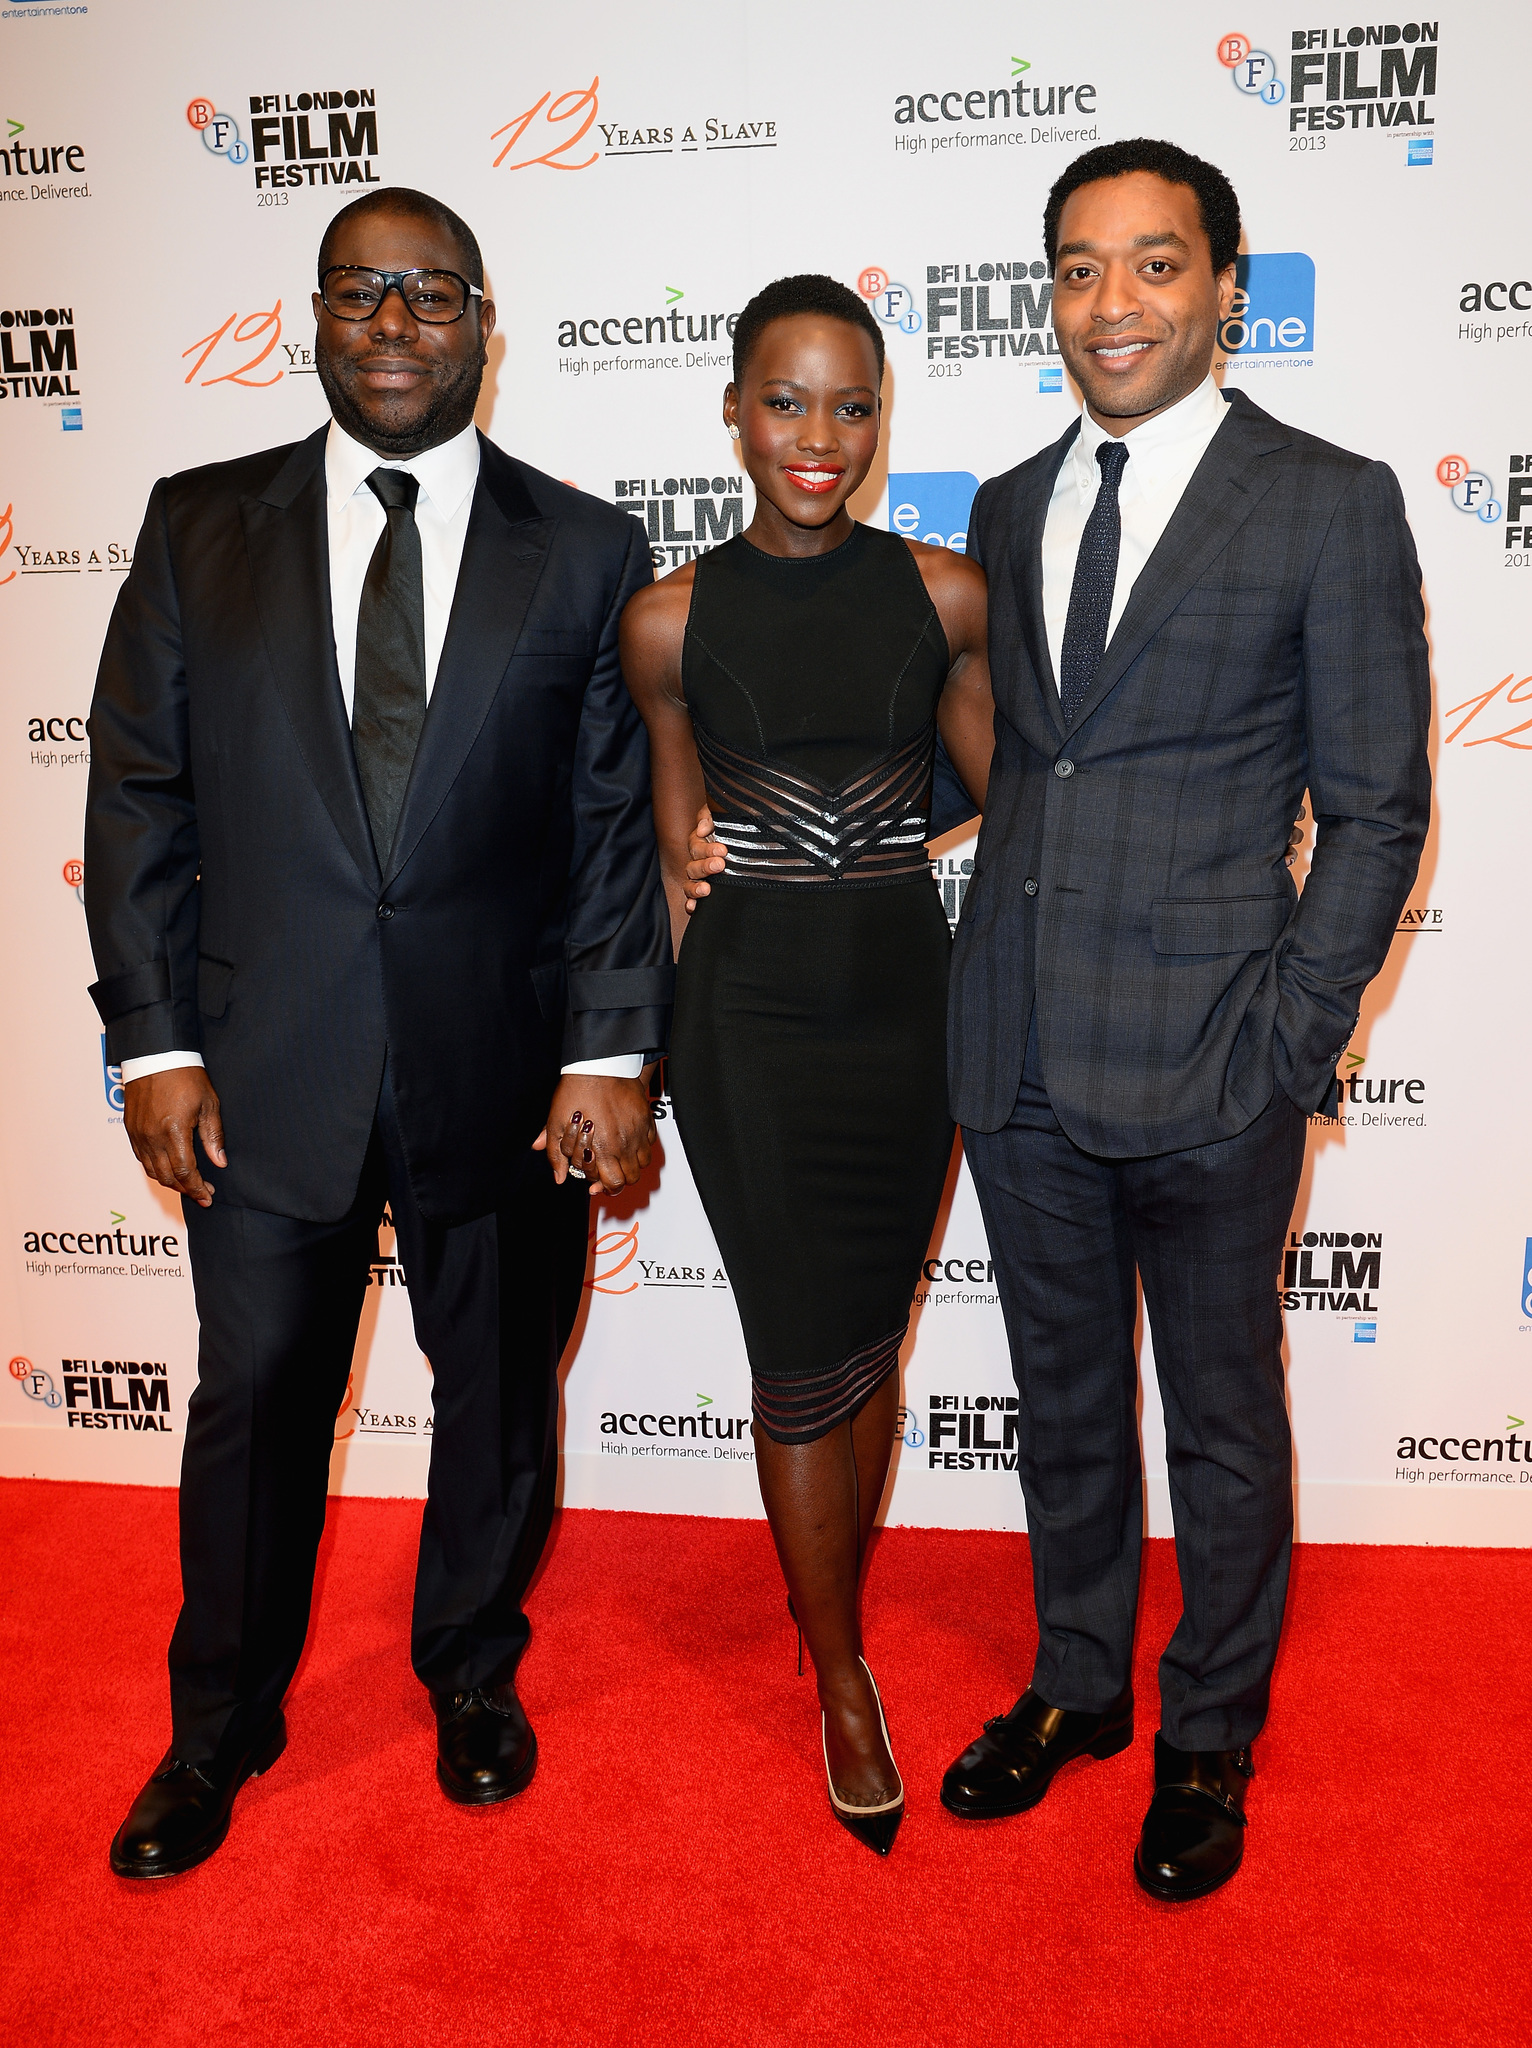 Chiwetel Ejiofor, Lupita Nyong'o and Steve McQueen at event of 12 vergoves metu (2013)